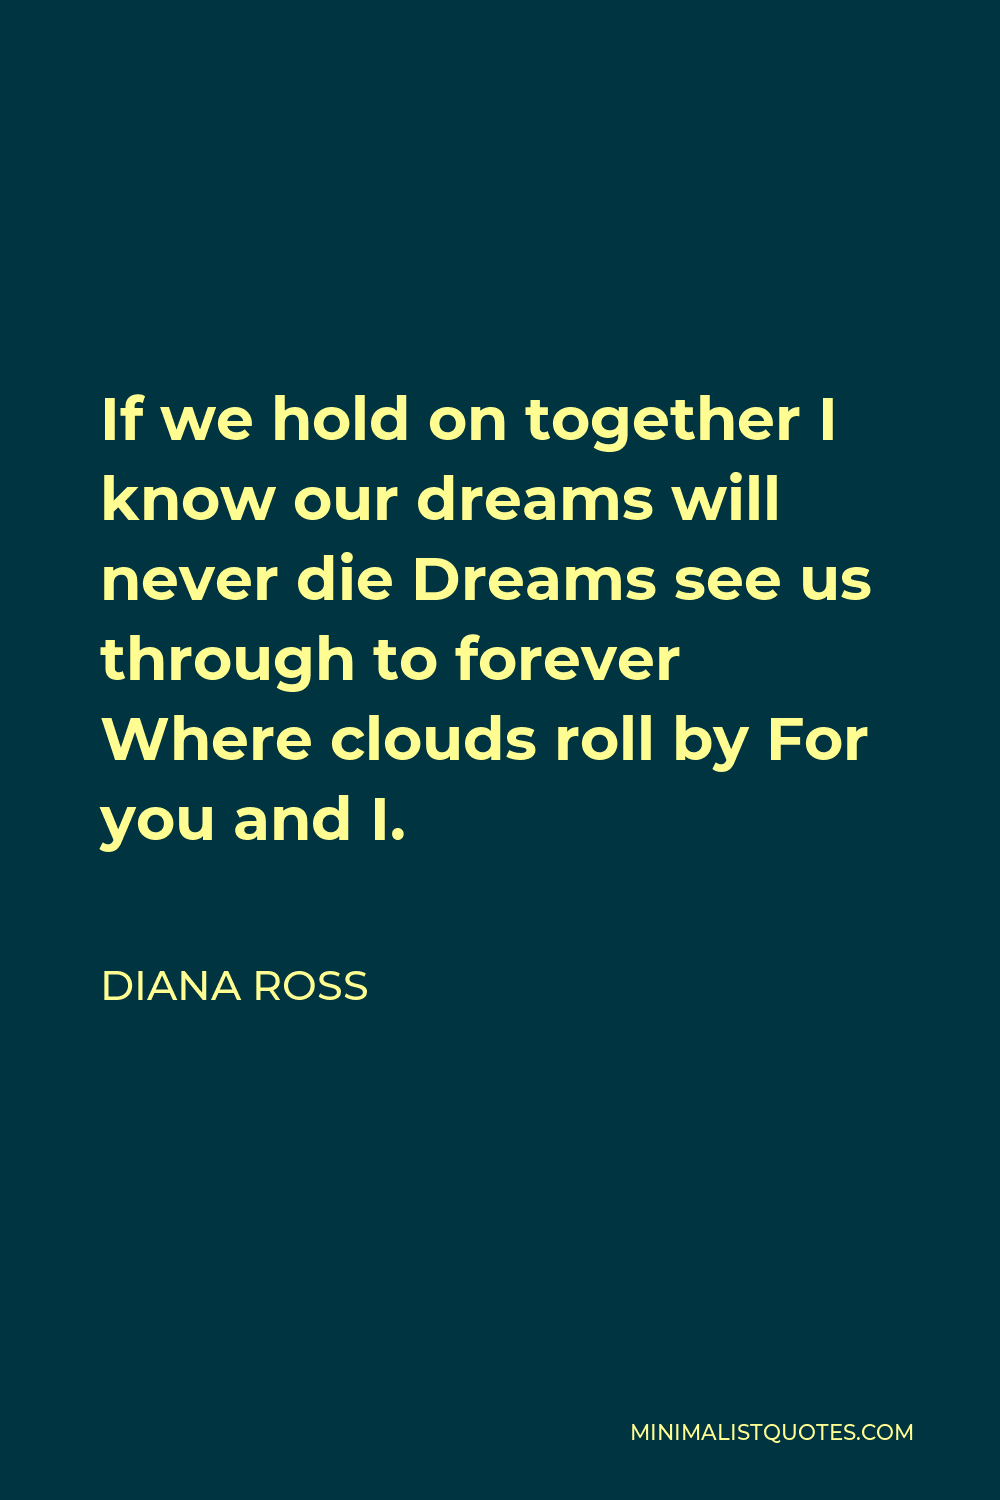 Diana Ross Quote - If we hold on together I know our dreams will never die Dreams see us through to forever Where clouds roll by For you and I.